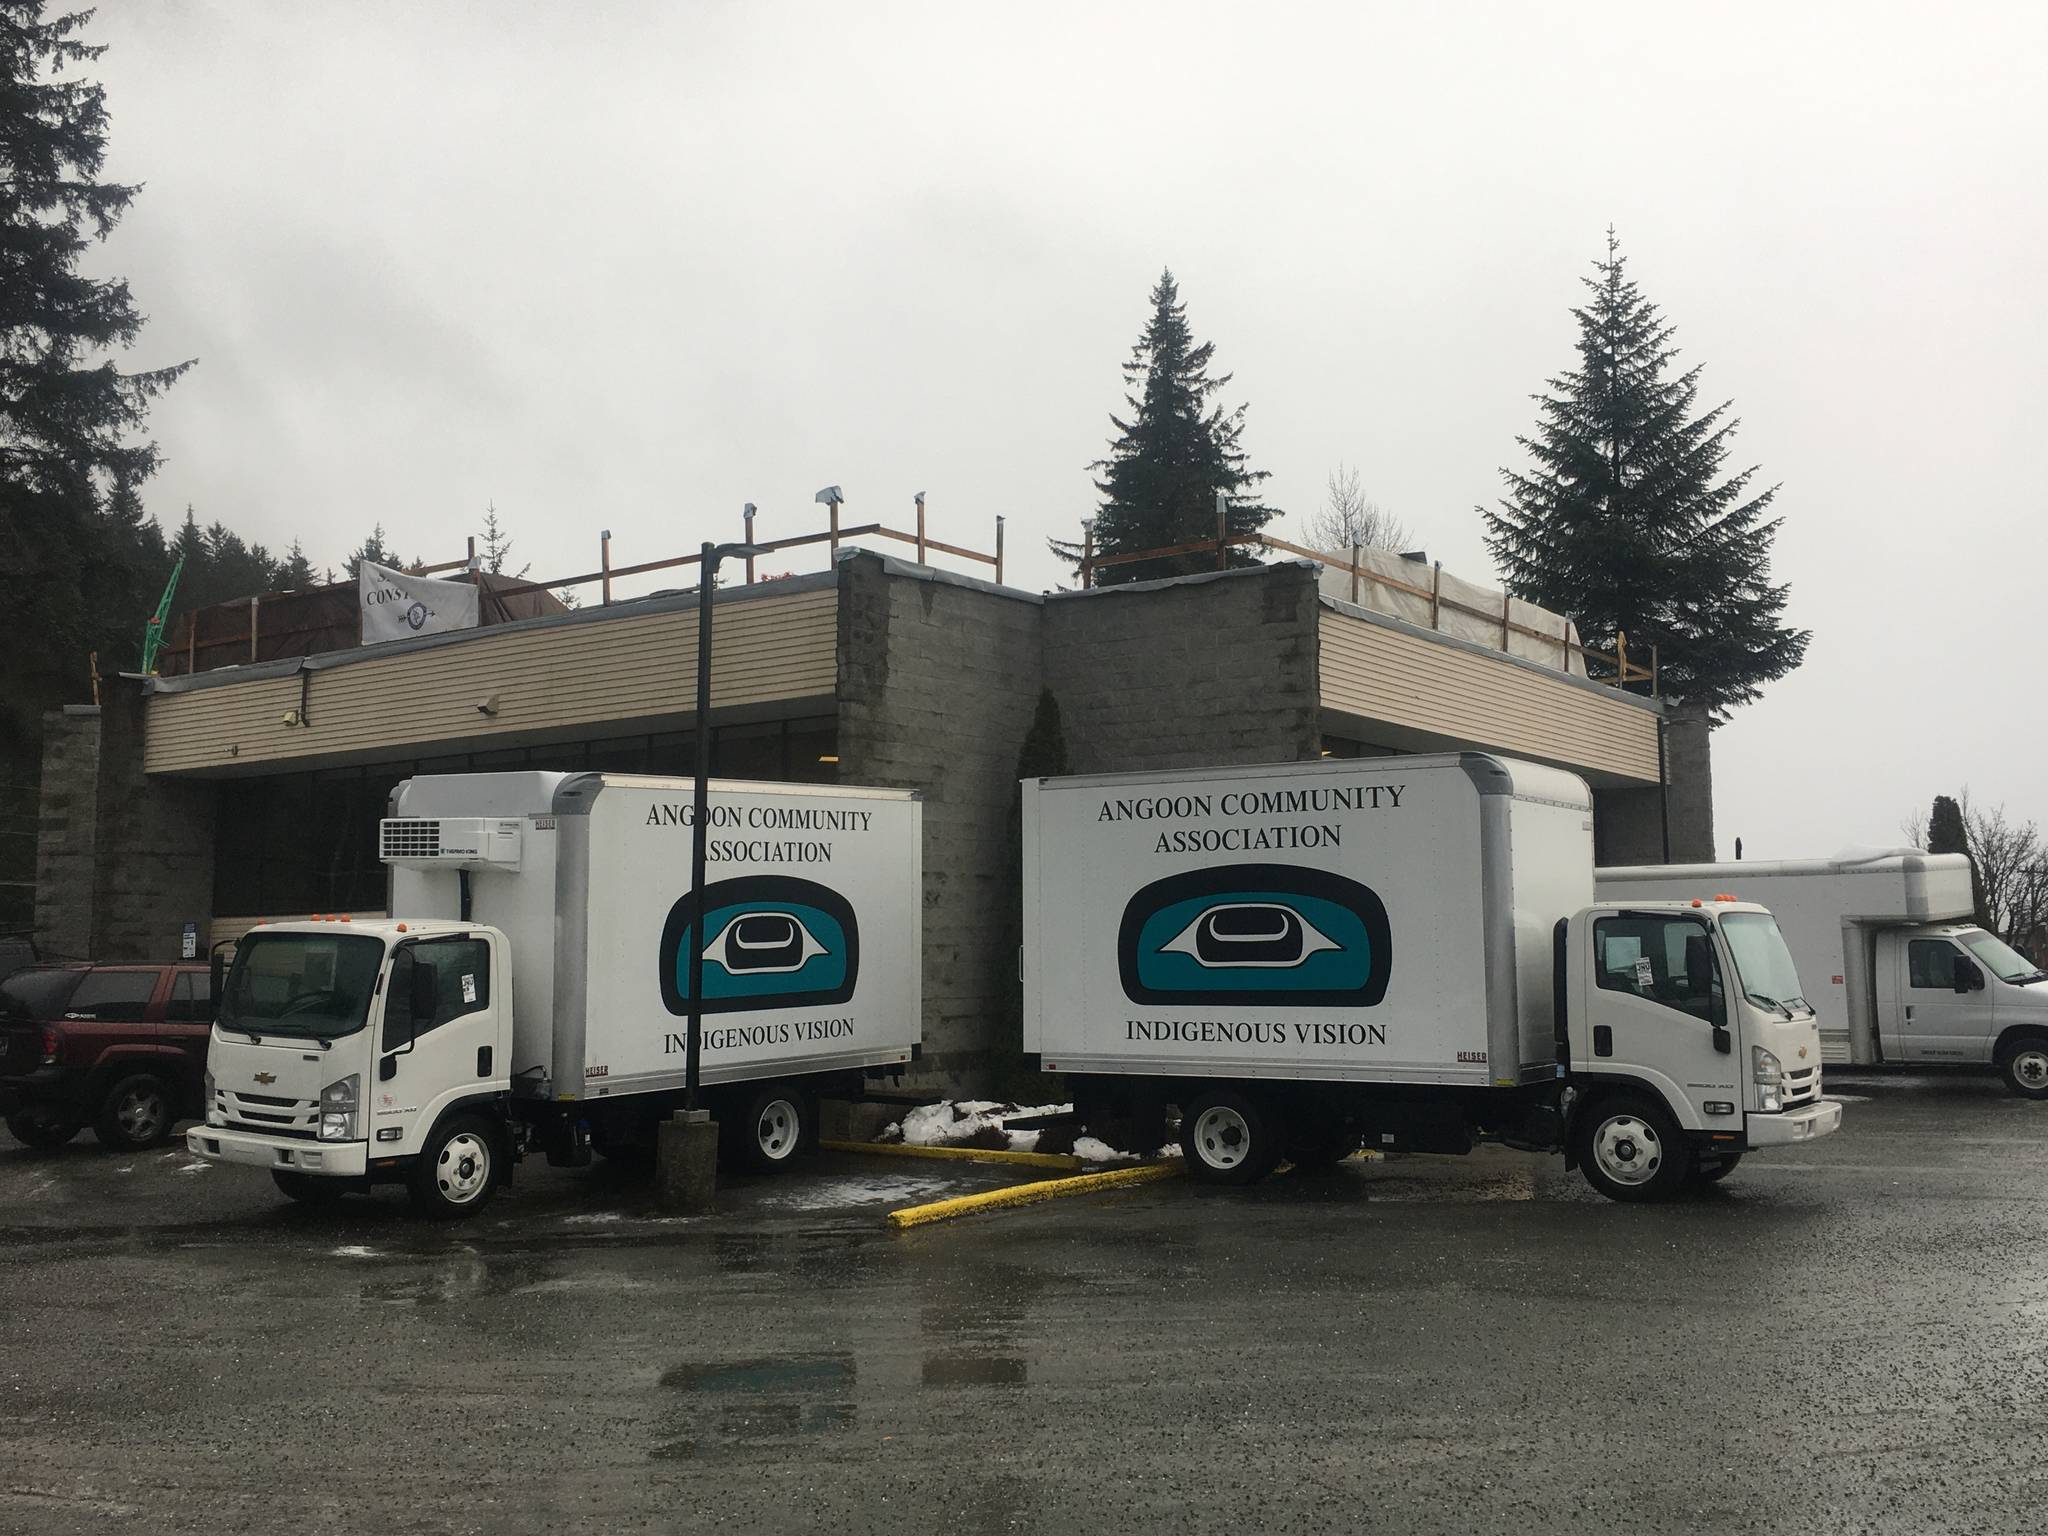 The Angoon Community Association is holding a turkey drive for the community of Angoon on Monday and Tuesday November 23-24. The ACA aims to get enough turkeys for every household in the town of about 500, which they will transport in recently acquired refrigerated trucks, shown above. (Michael S. Lockett / Juneau Empire)